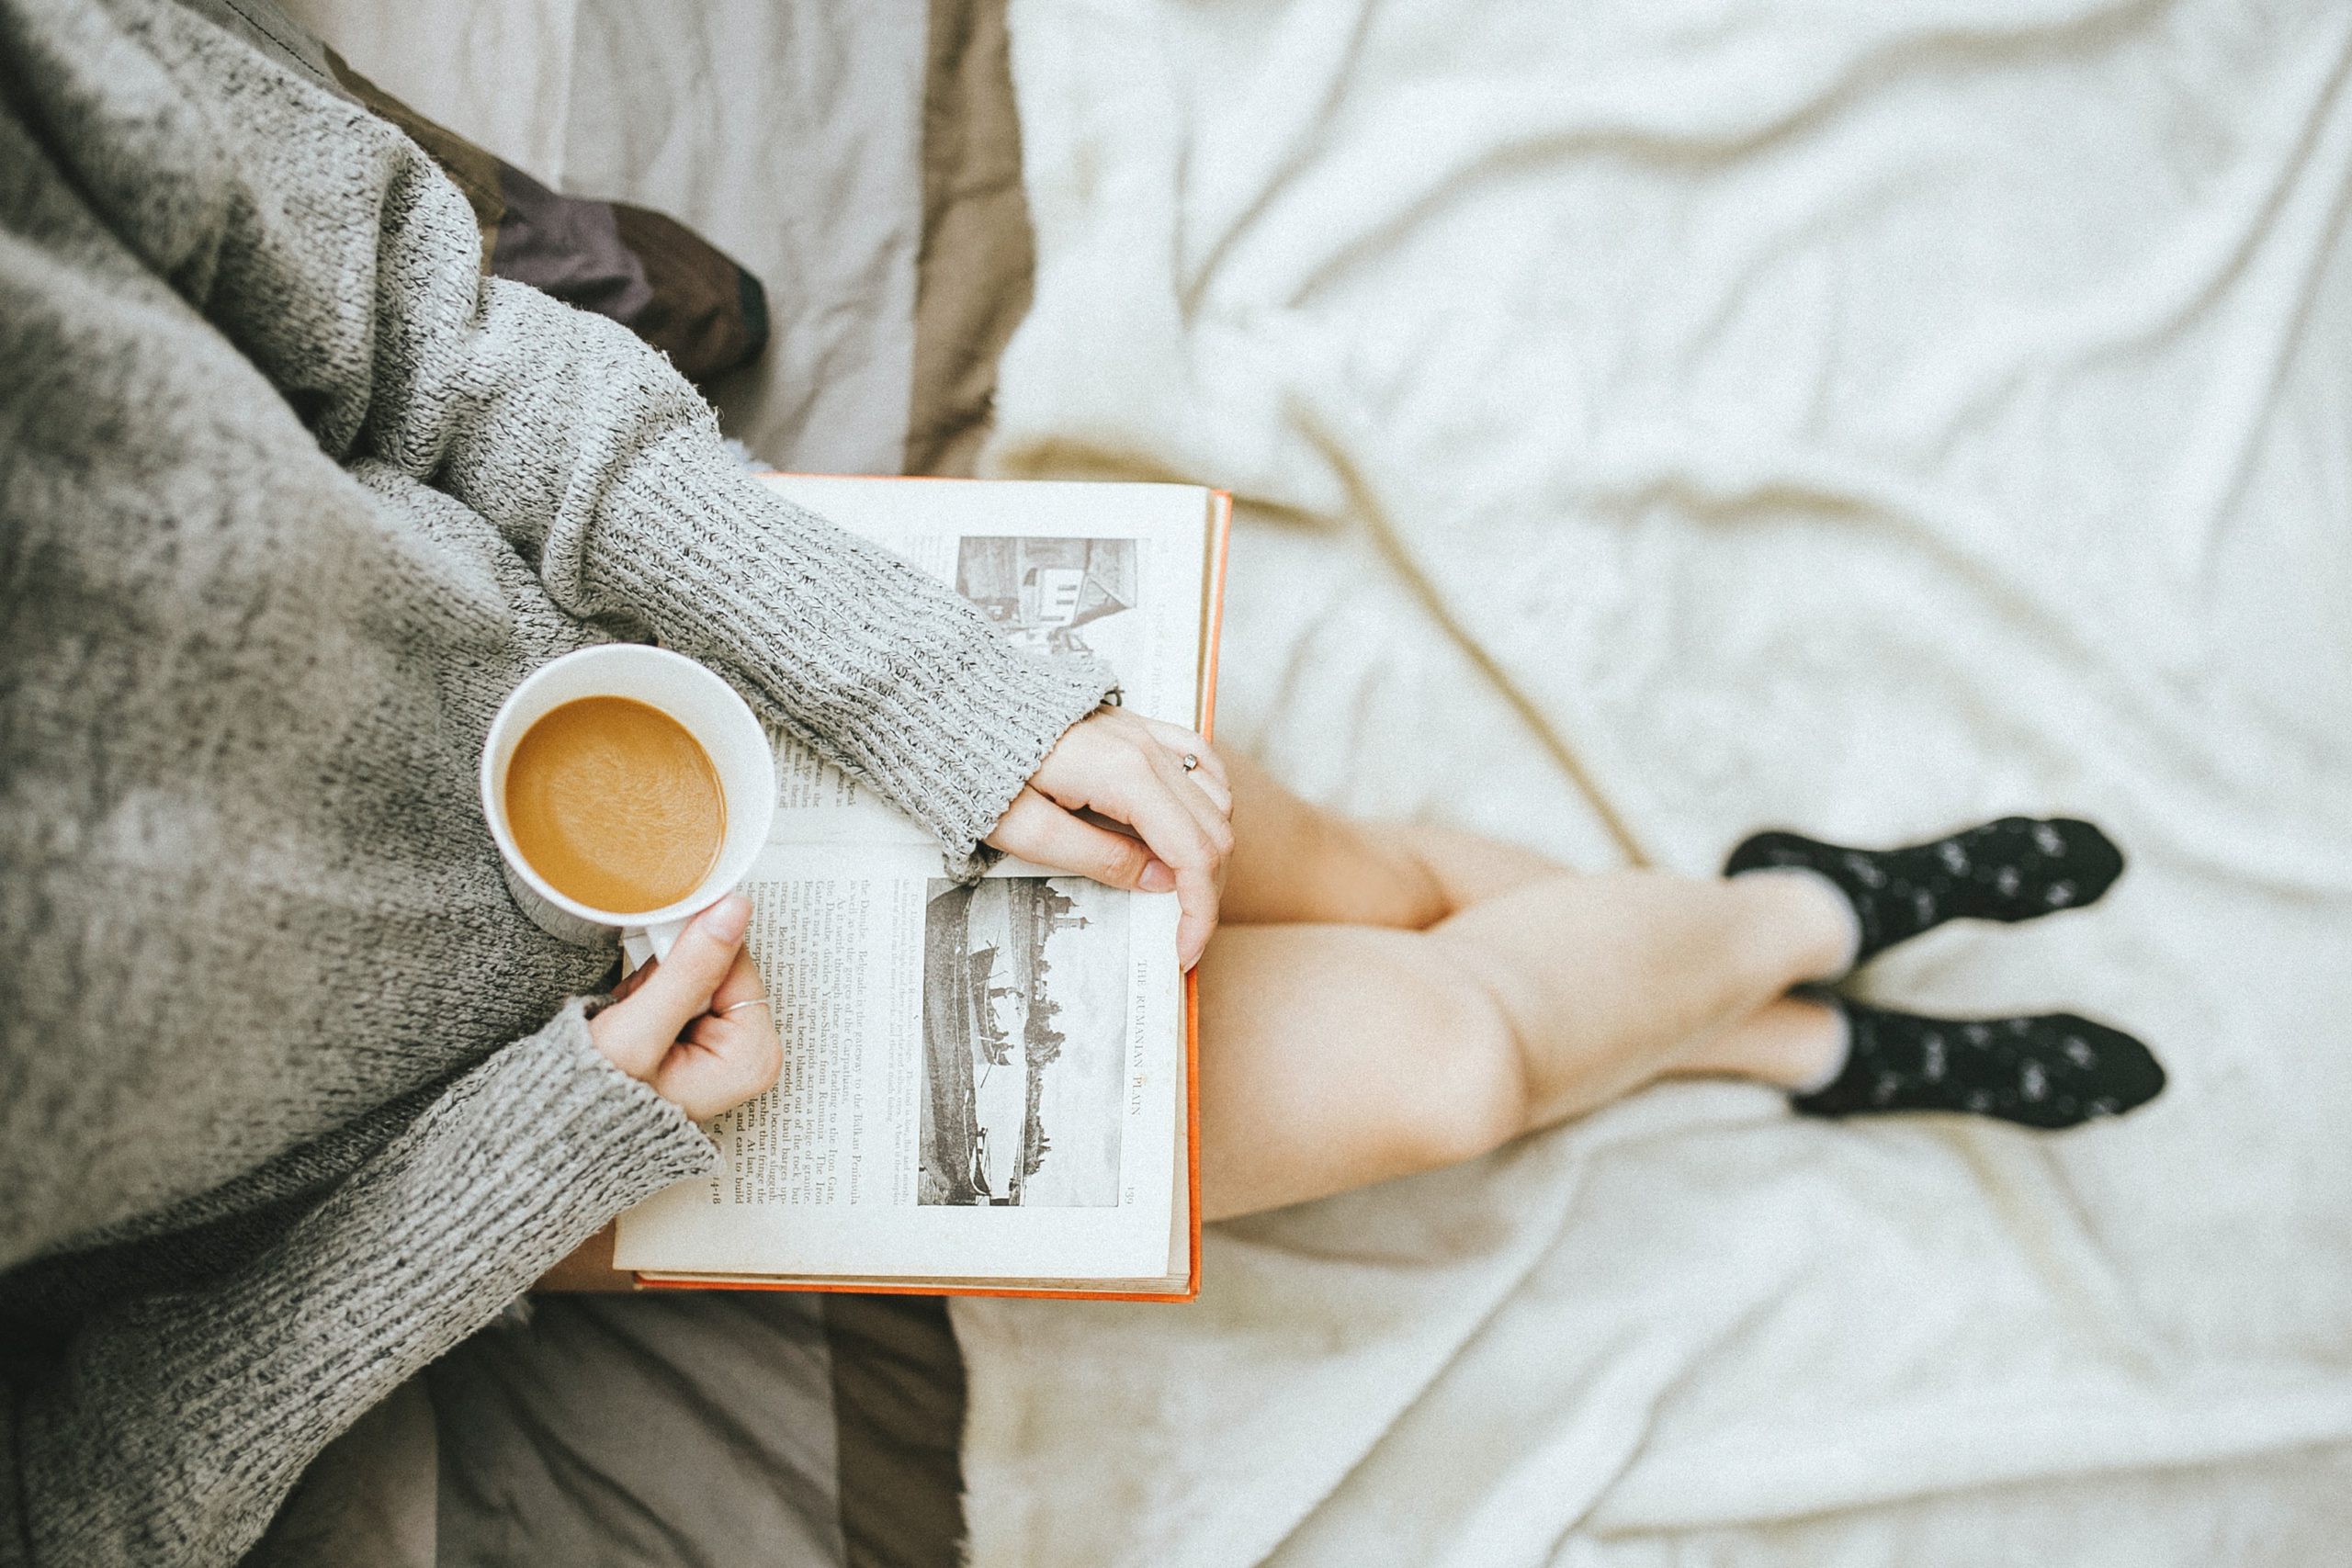 Woman reading book on lap and holding coffee mug